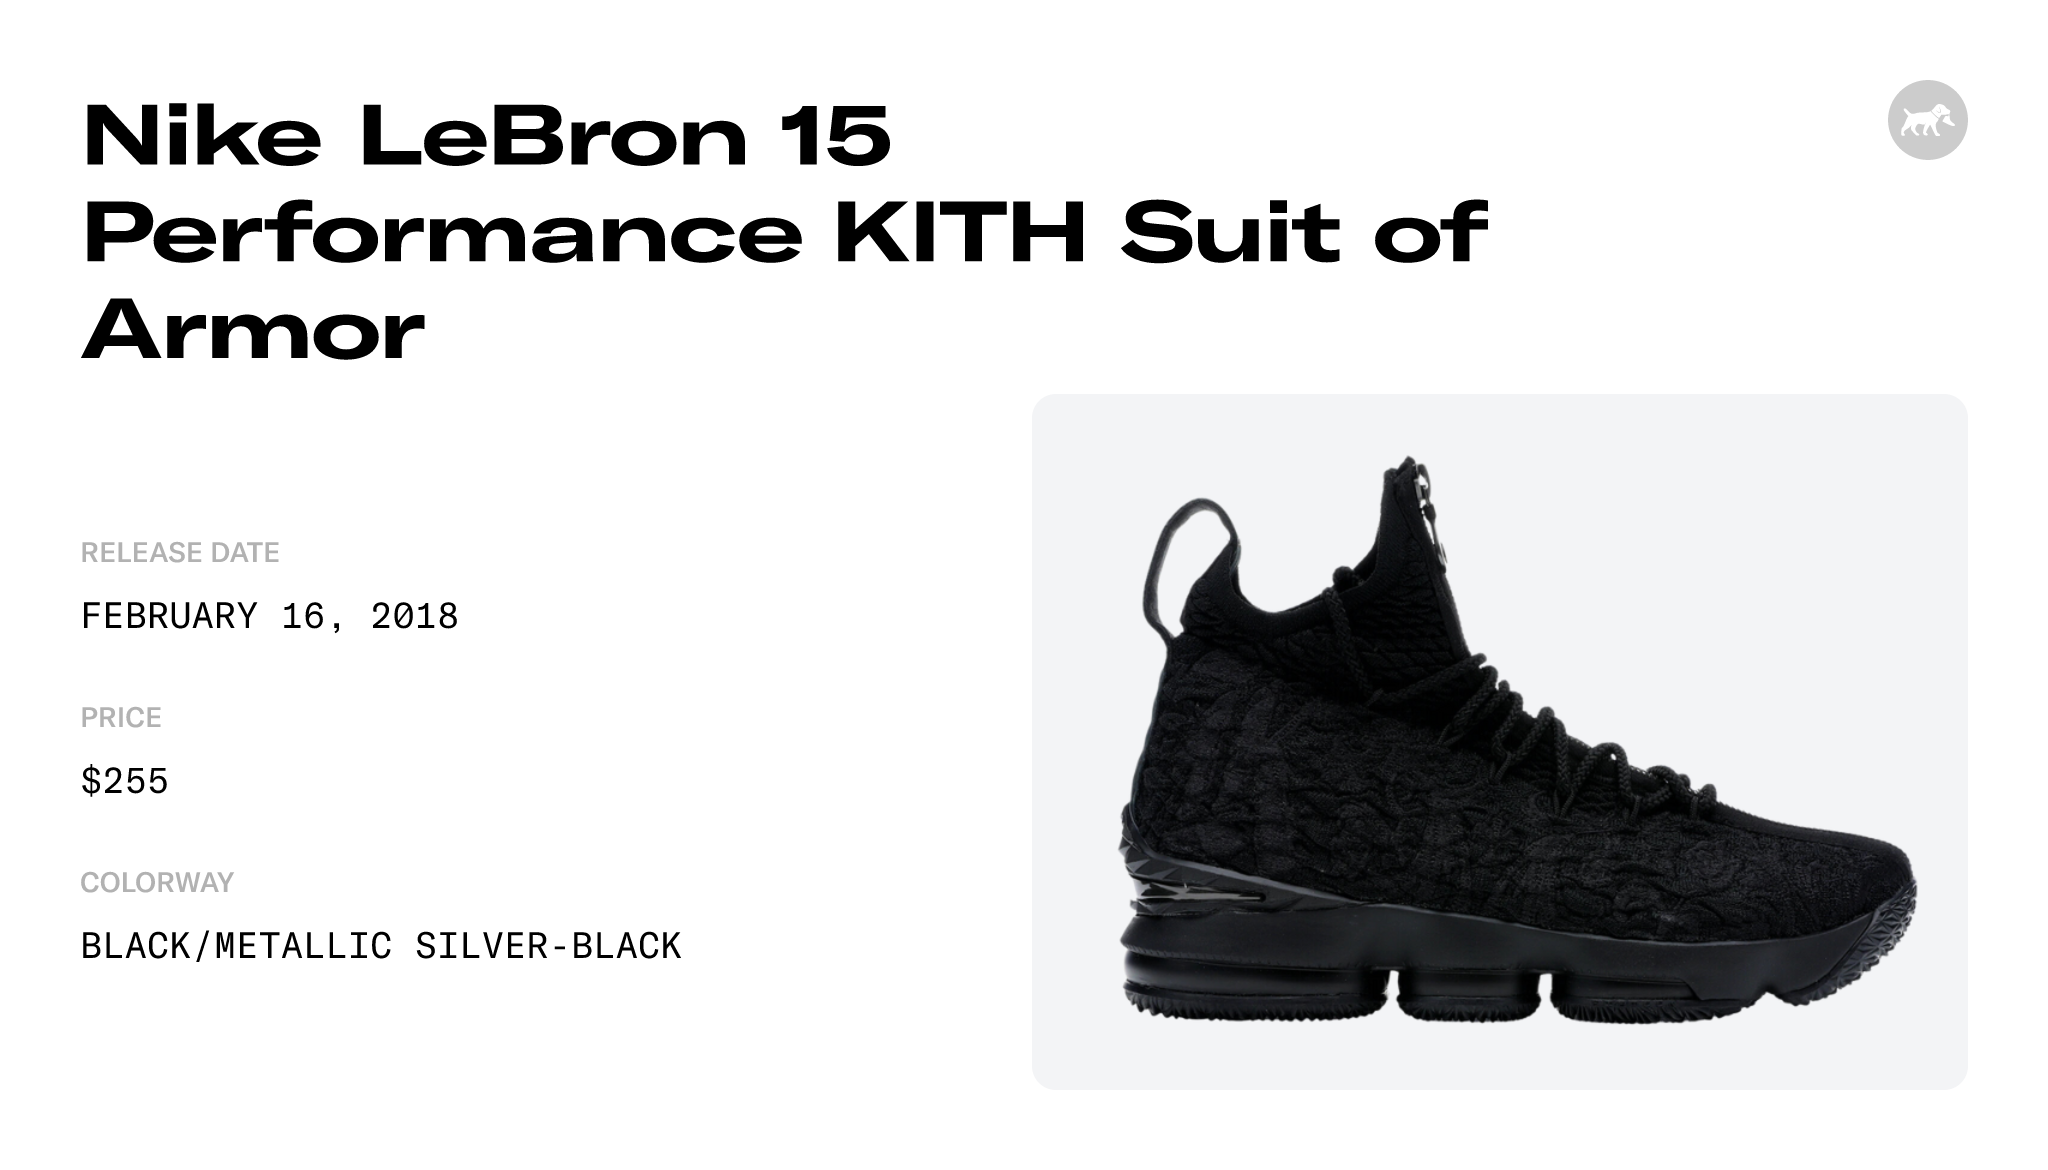 Nike LeBron 15 Performance KITH Suit of Armor - AJ3936-001 Raffles and  Release Date